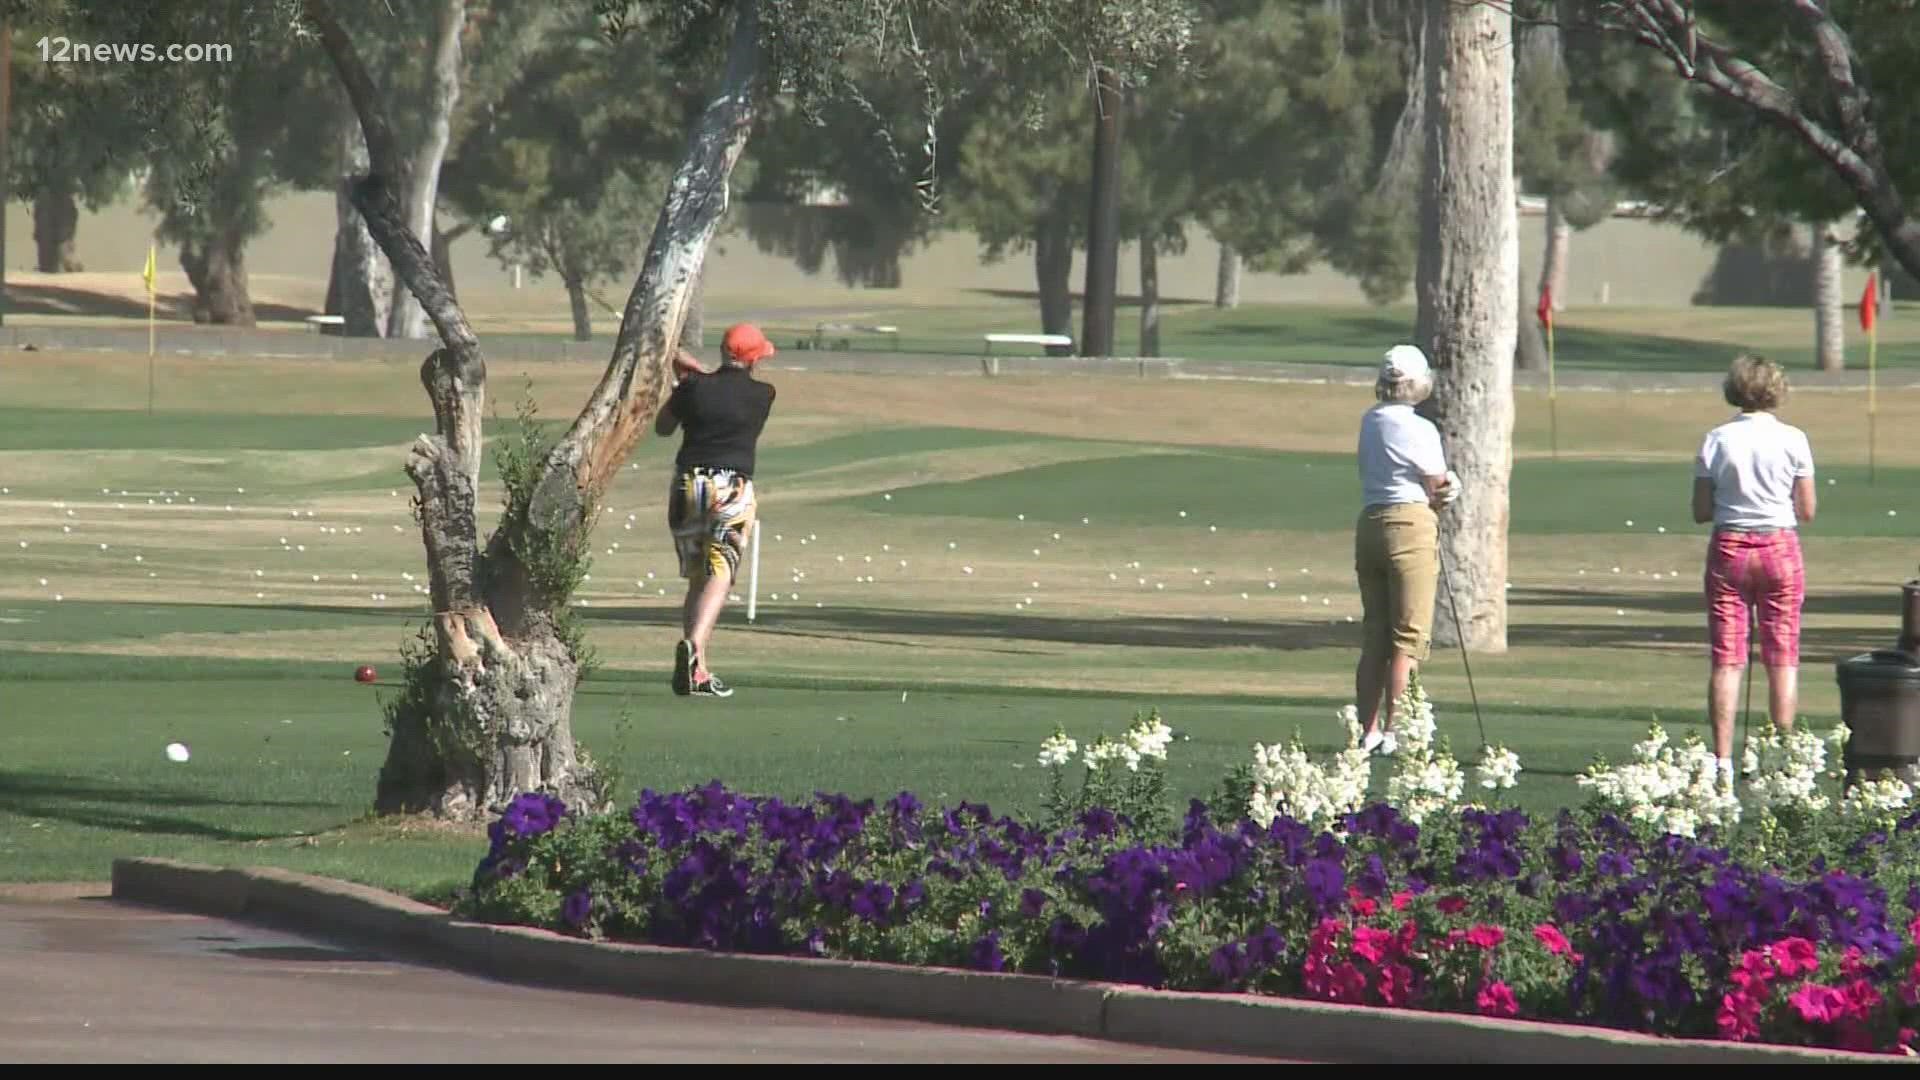 There are numerous reasons why cutting water off from the city's golf courses would cause its own problems.